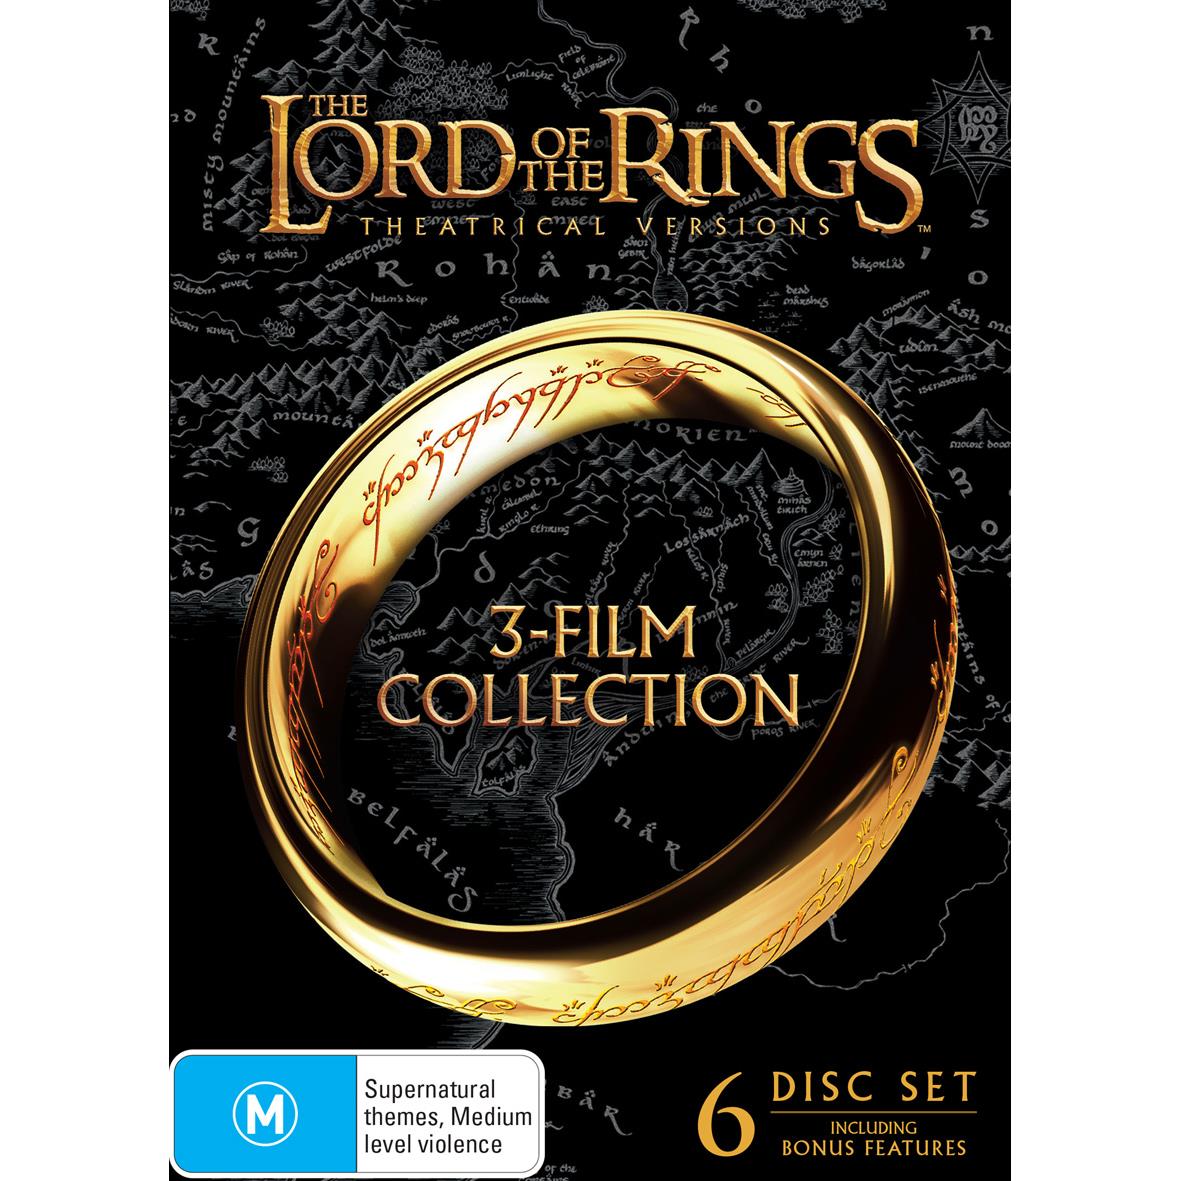 Amazon.com: The Lord of the Rings: The Motion Picture Trilogy (Widescreen  Edition) : Viggo Mortensen, Peter Jackson: Movies & TV